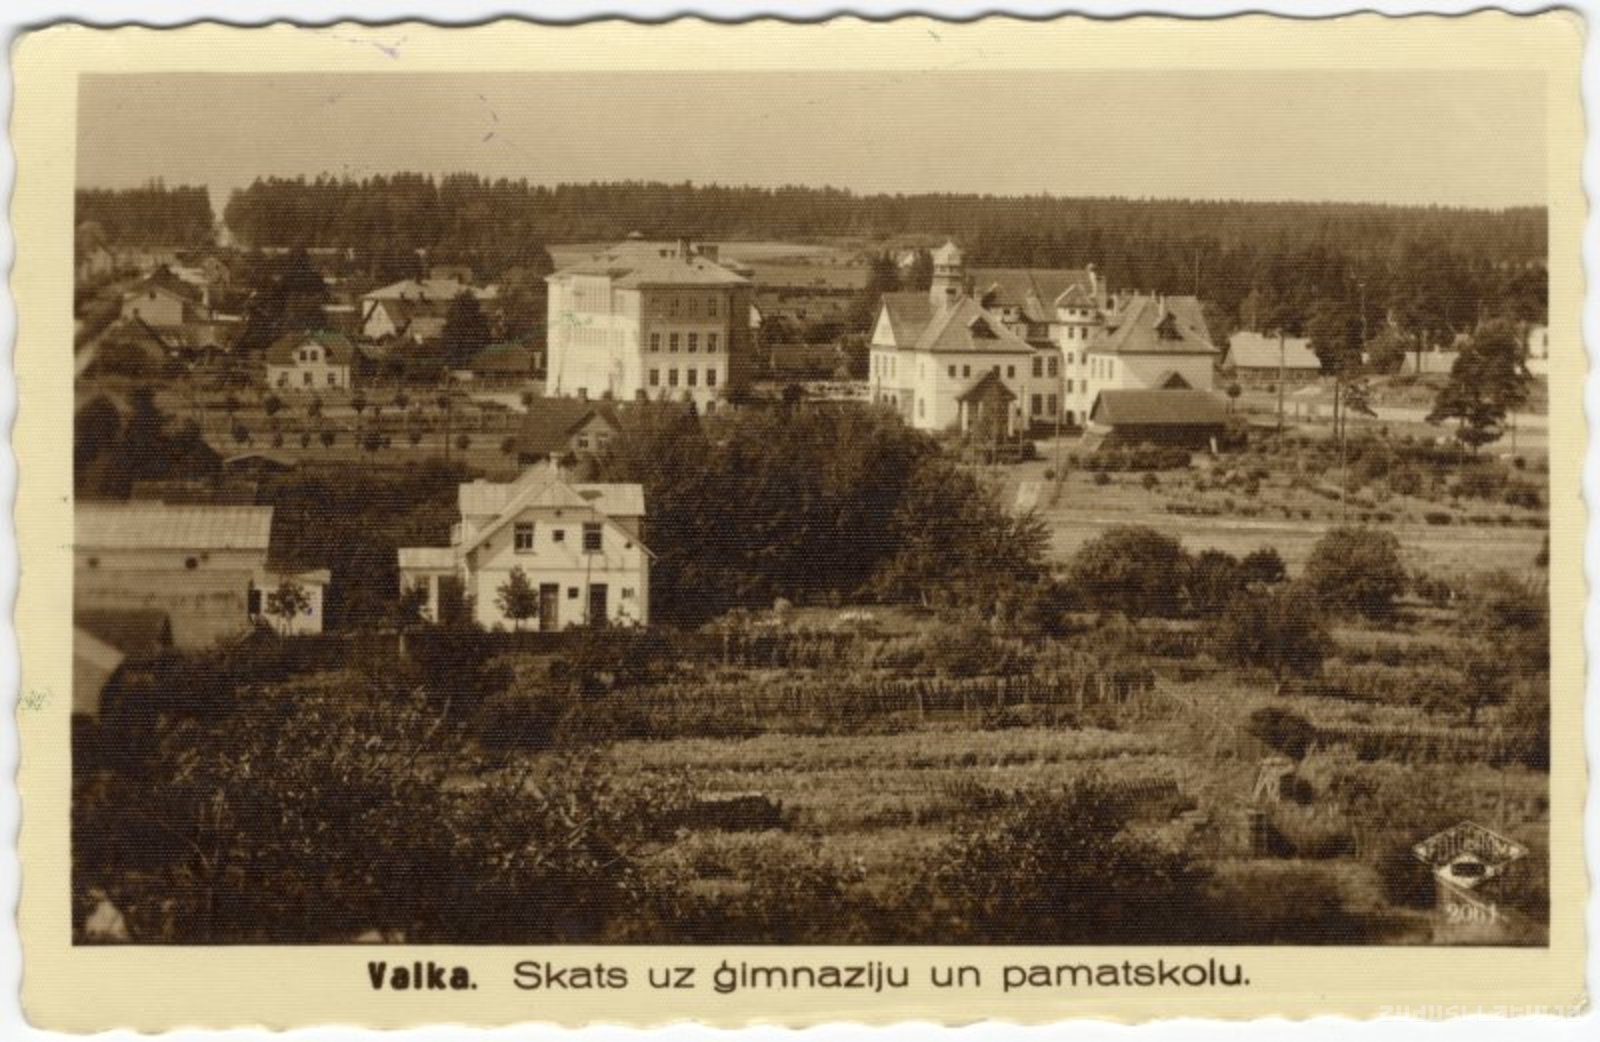 Valka, Valka. View of family and basic school